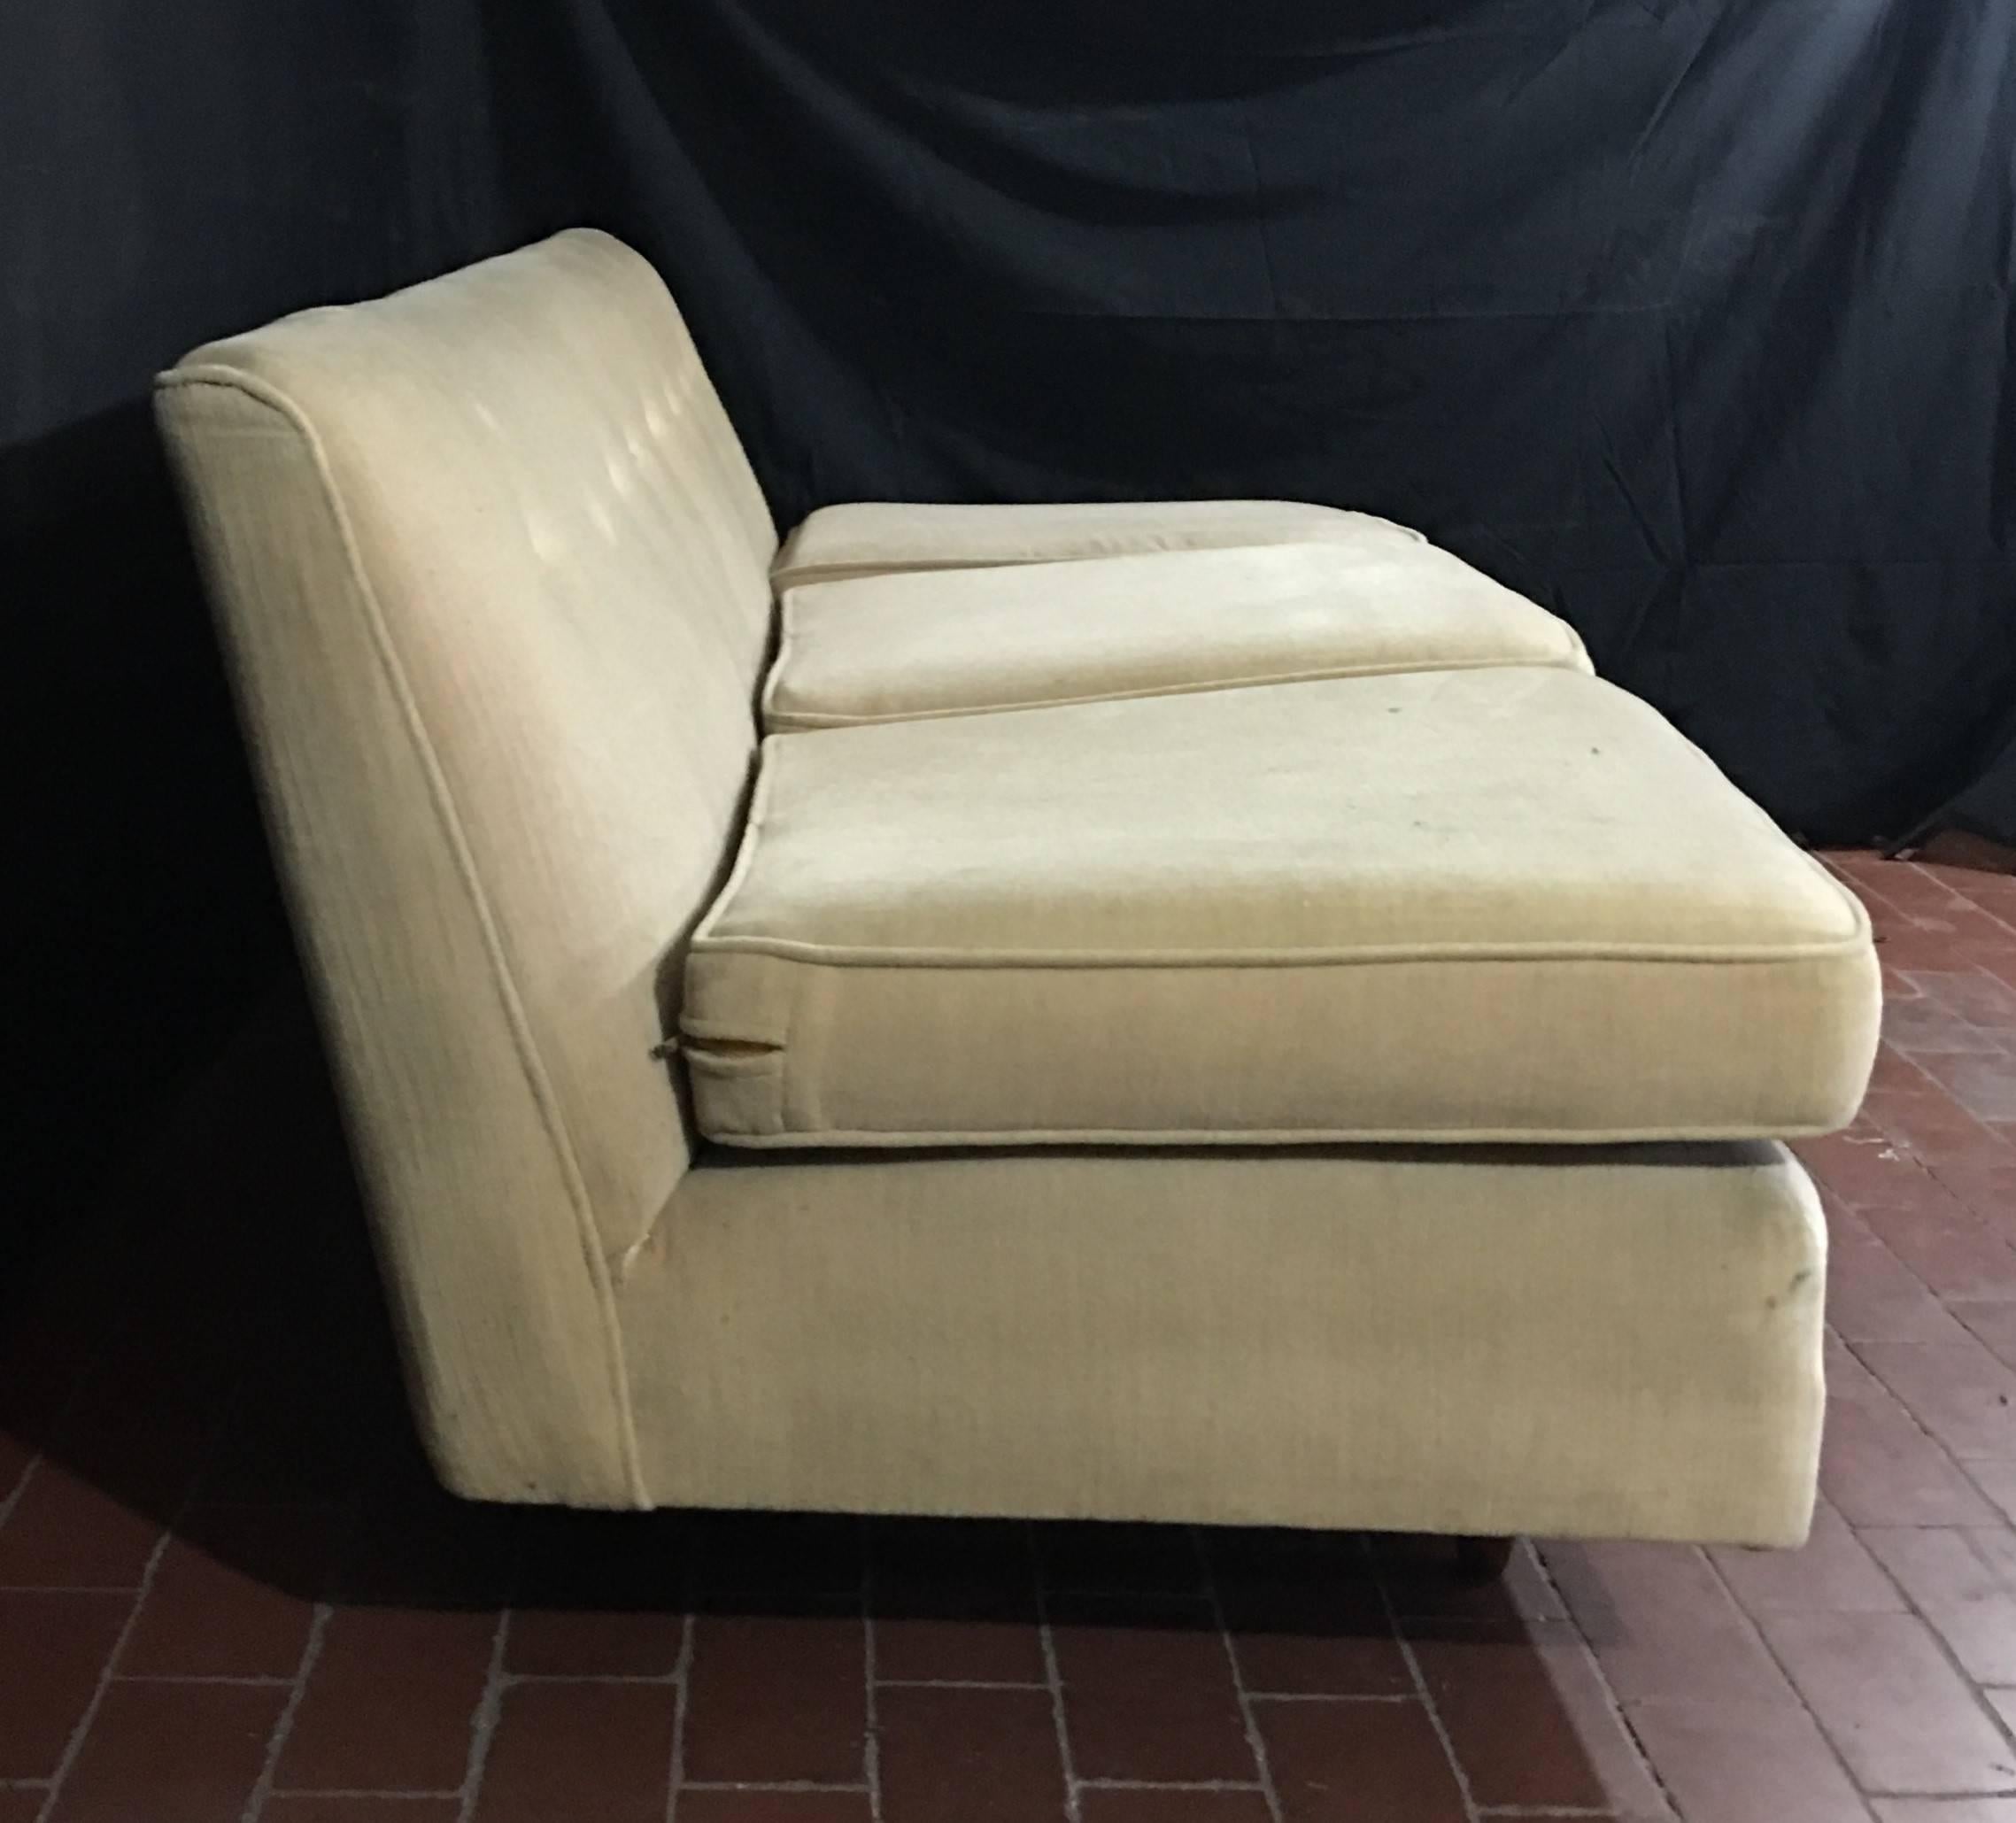 Vintage, midcentury armless sofa and chair. The frames are structurally sound but should be refurbished. Offered as is, it is priced at $2250, or, following full refurbishment and re-upholstery at $3500.00, COM: 22 yds The side chair is 34